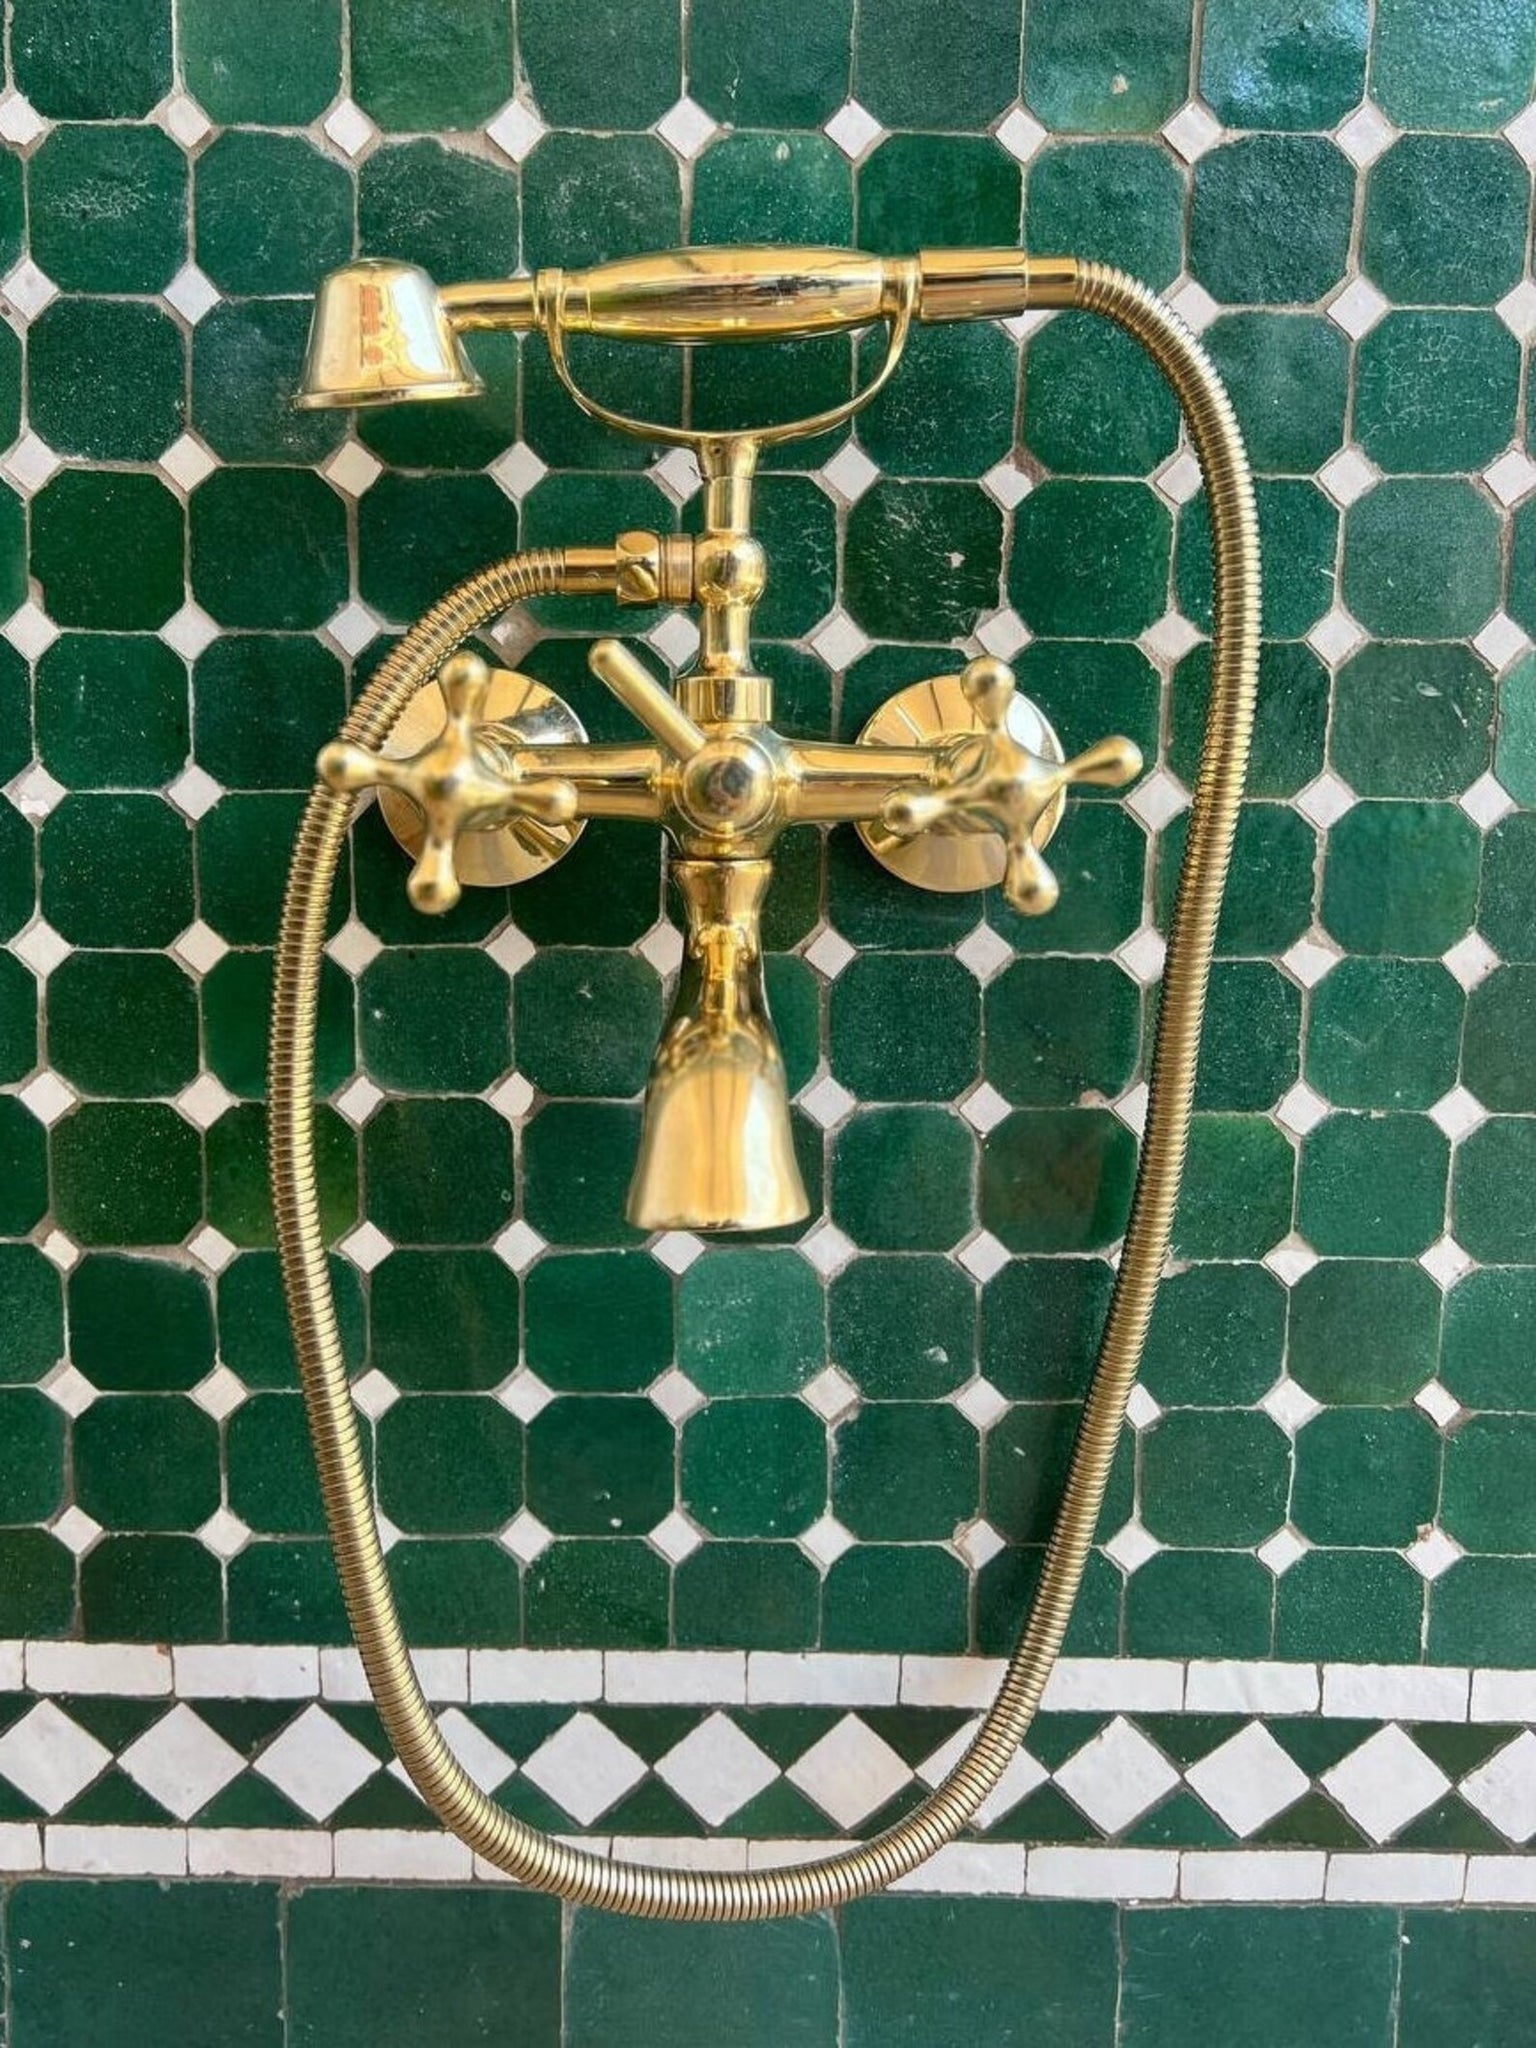 Vintage Clowfoot Tub Wall Mount in Unlacquered Brass - Vintage Tub Filler for bathroom with handshower